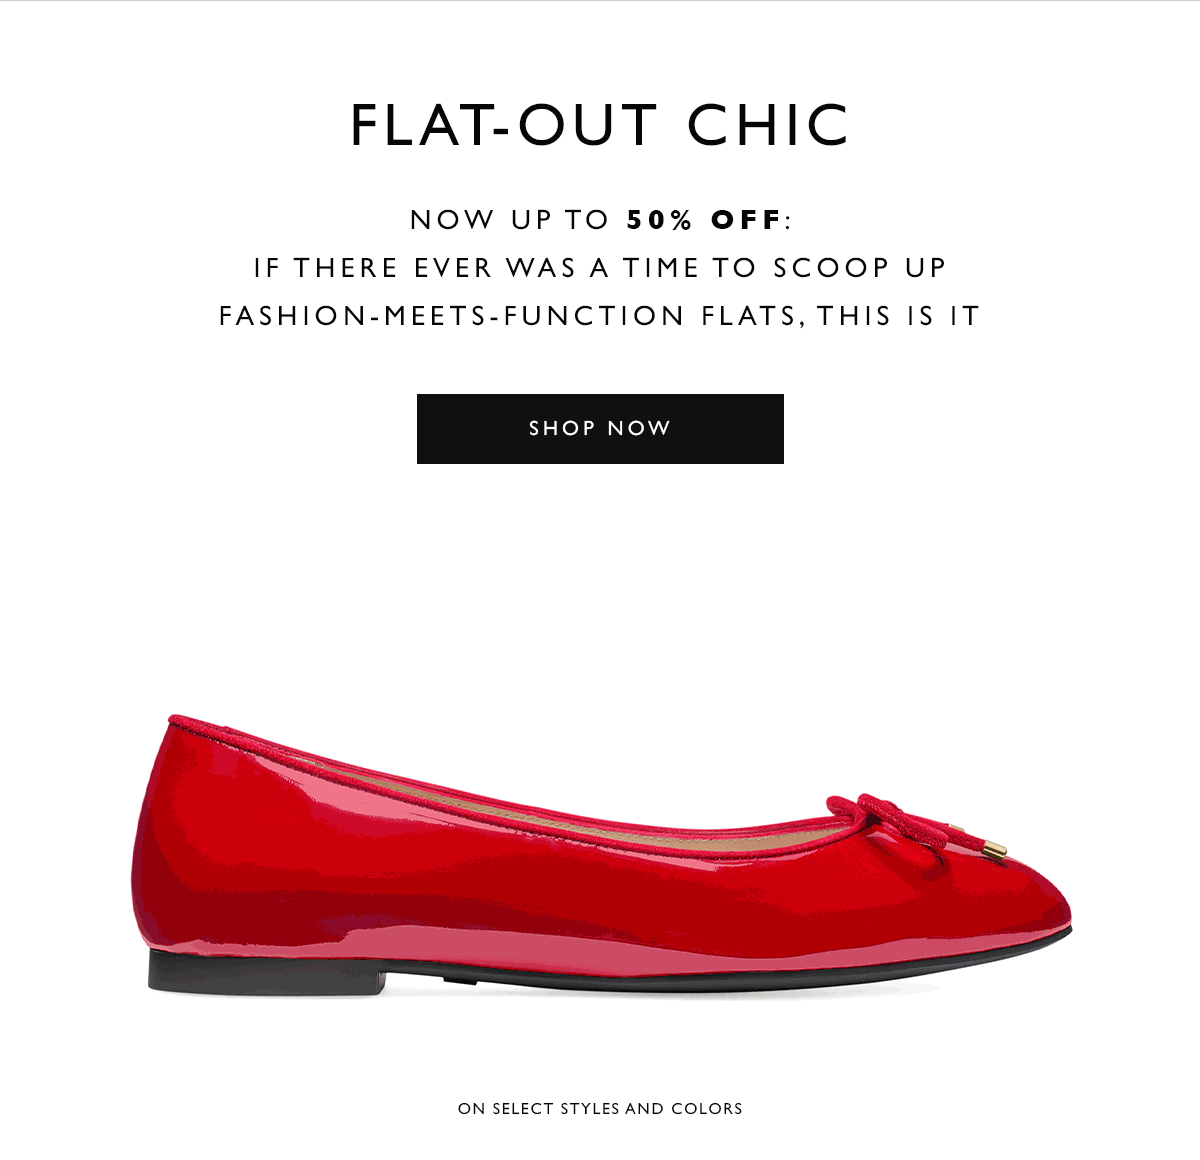  Flat-Out Chic. Now up to 50% off: If there ever was a time to scoop up fashion-meets-function flats, this is it. SHOP NOW. On select styles and colors